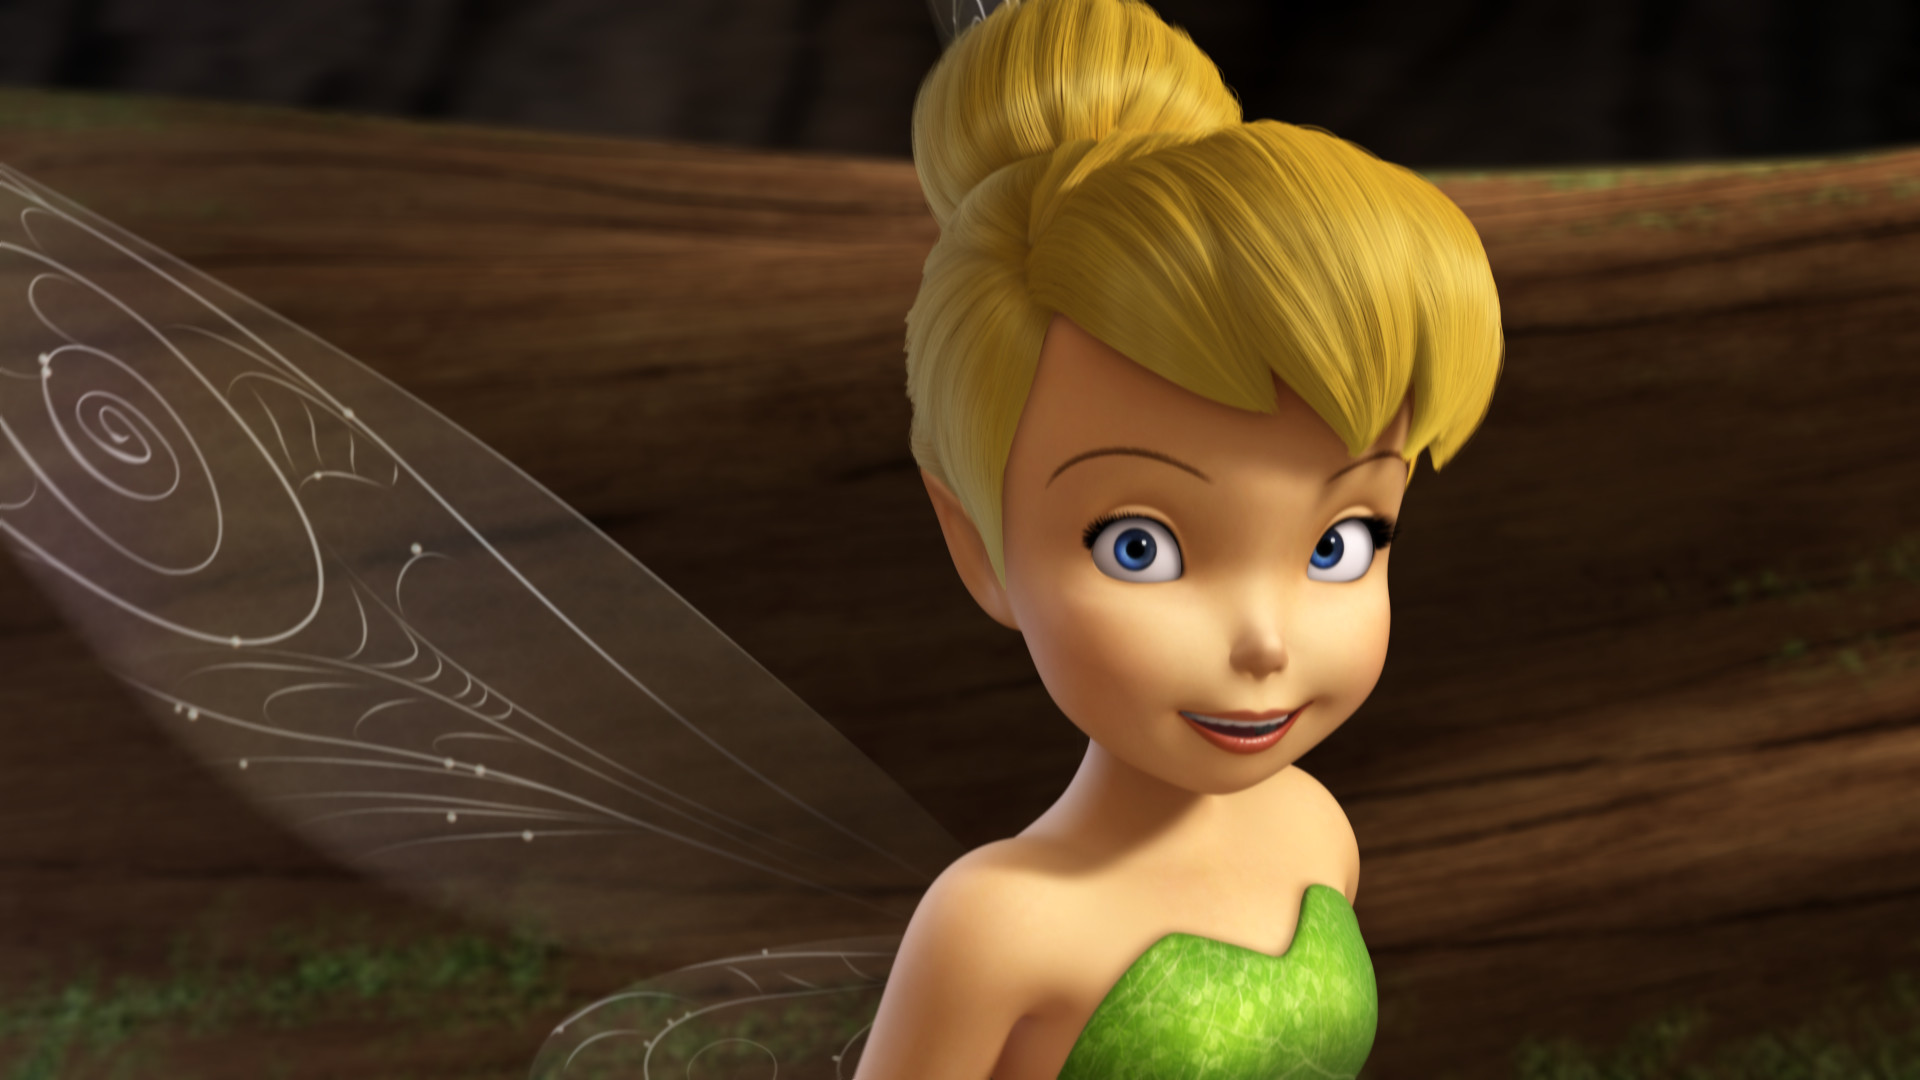 1920x1080 Tinkerbell Movie Characters